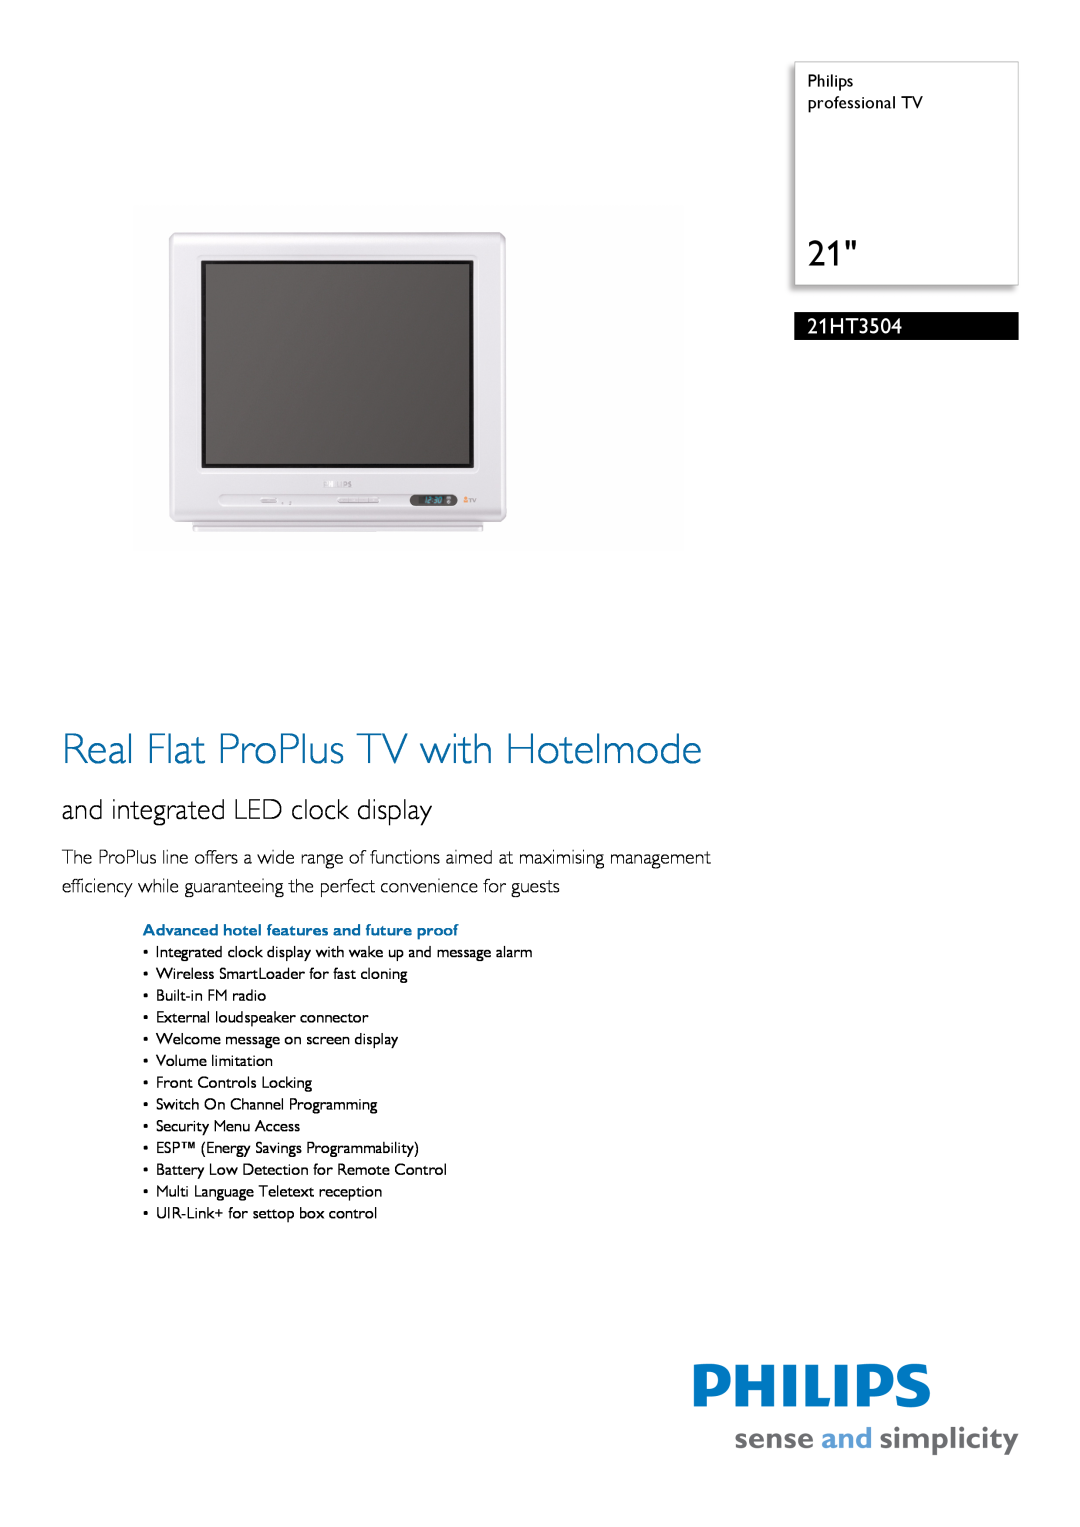 Philips 21HT3504/05 manual Philips professional TV, Real Flat ProPlus TV with Hotelmode, and integrated LED clock display 